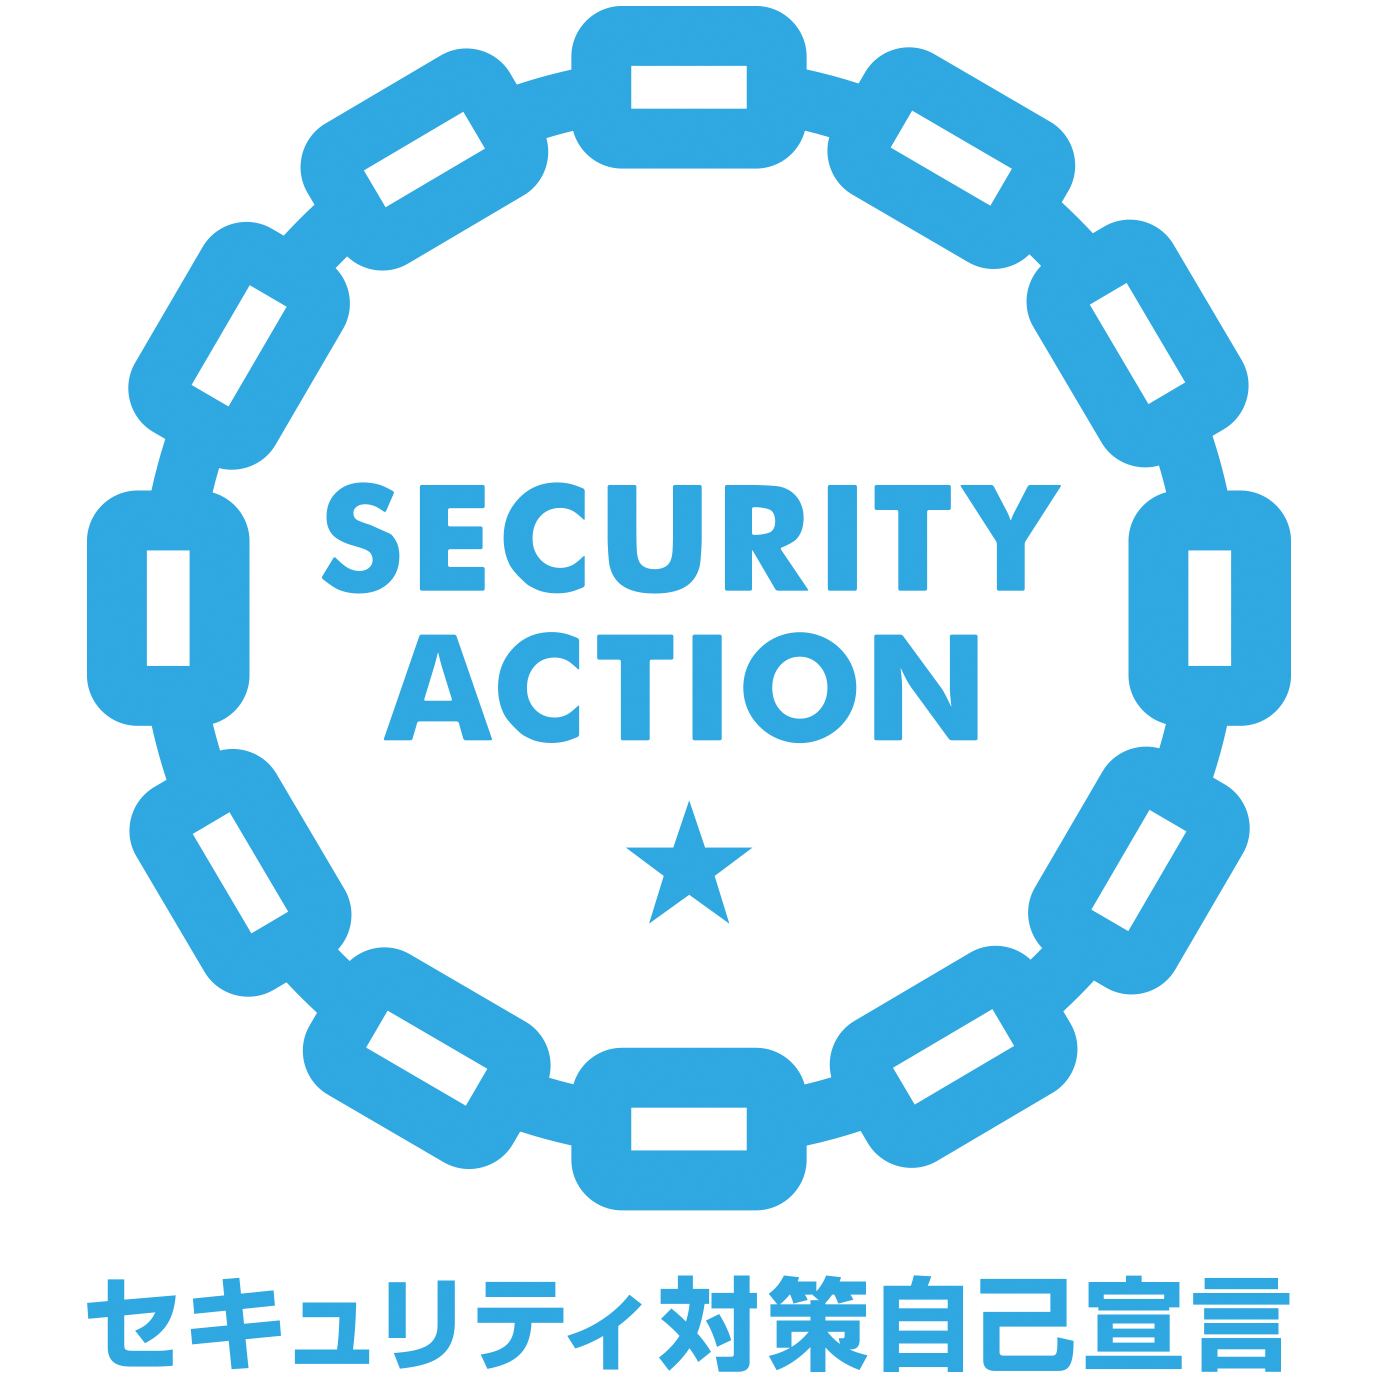 Declaration of commitment to implement information security